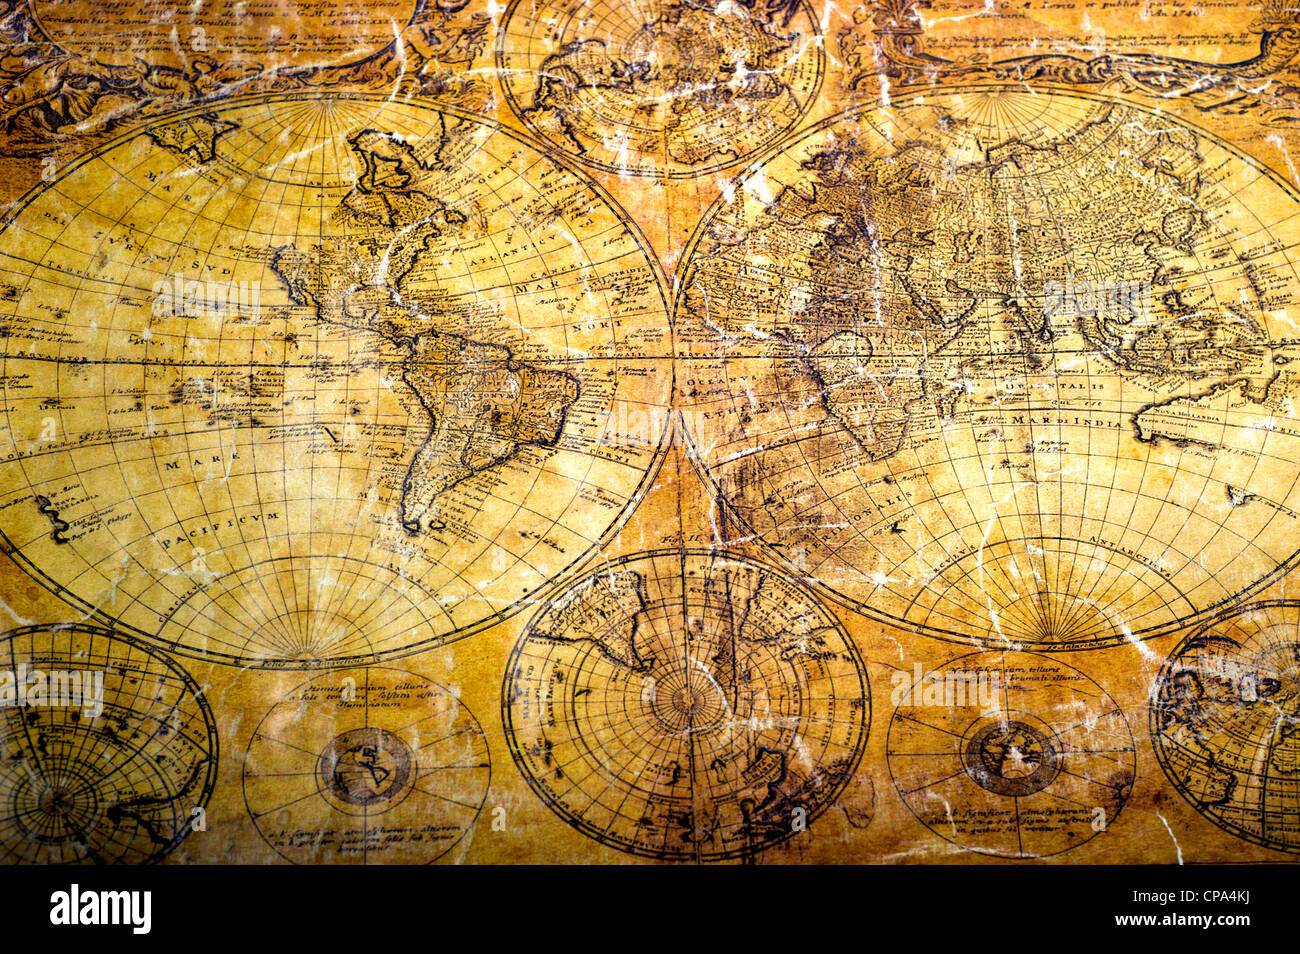 old map of the world Stock Photo